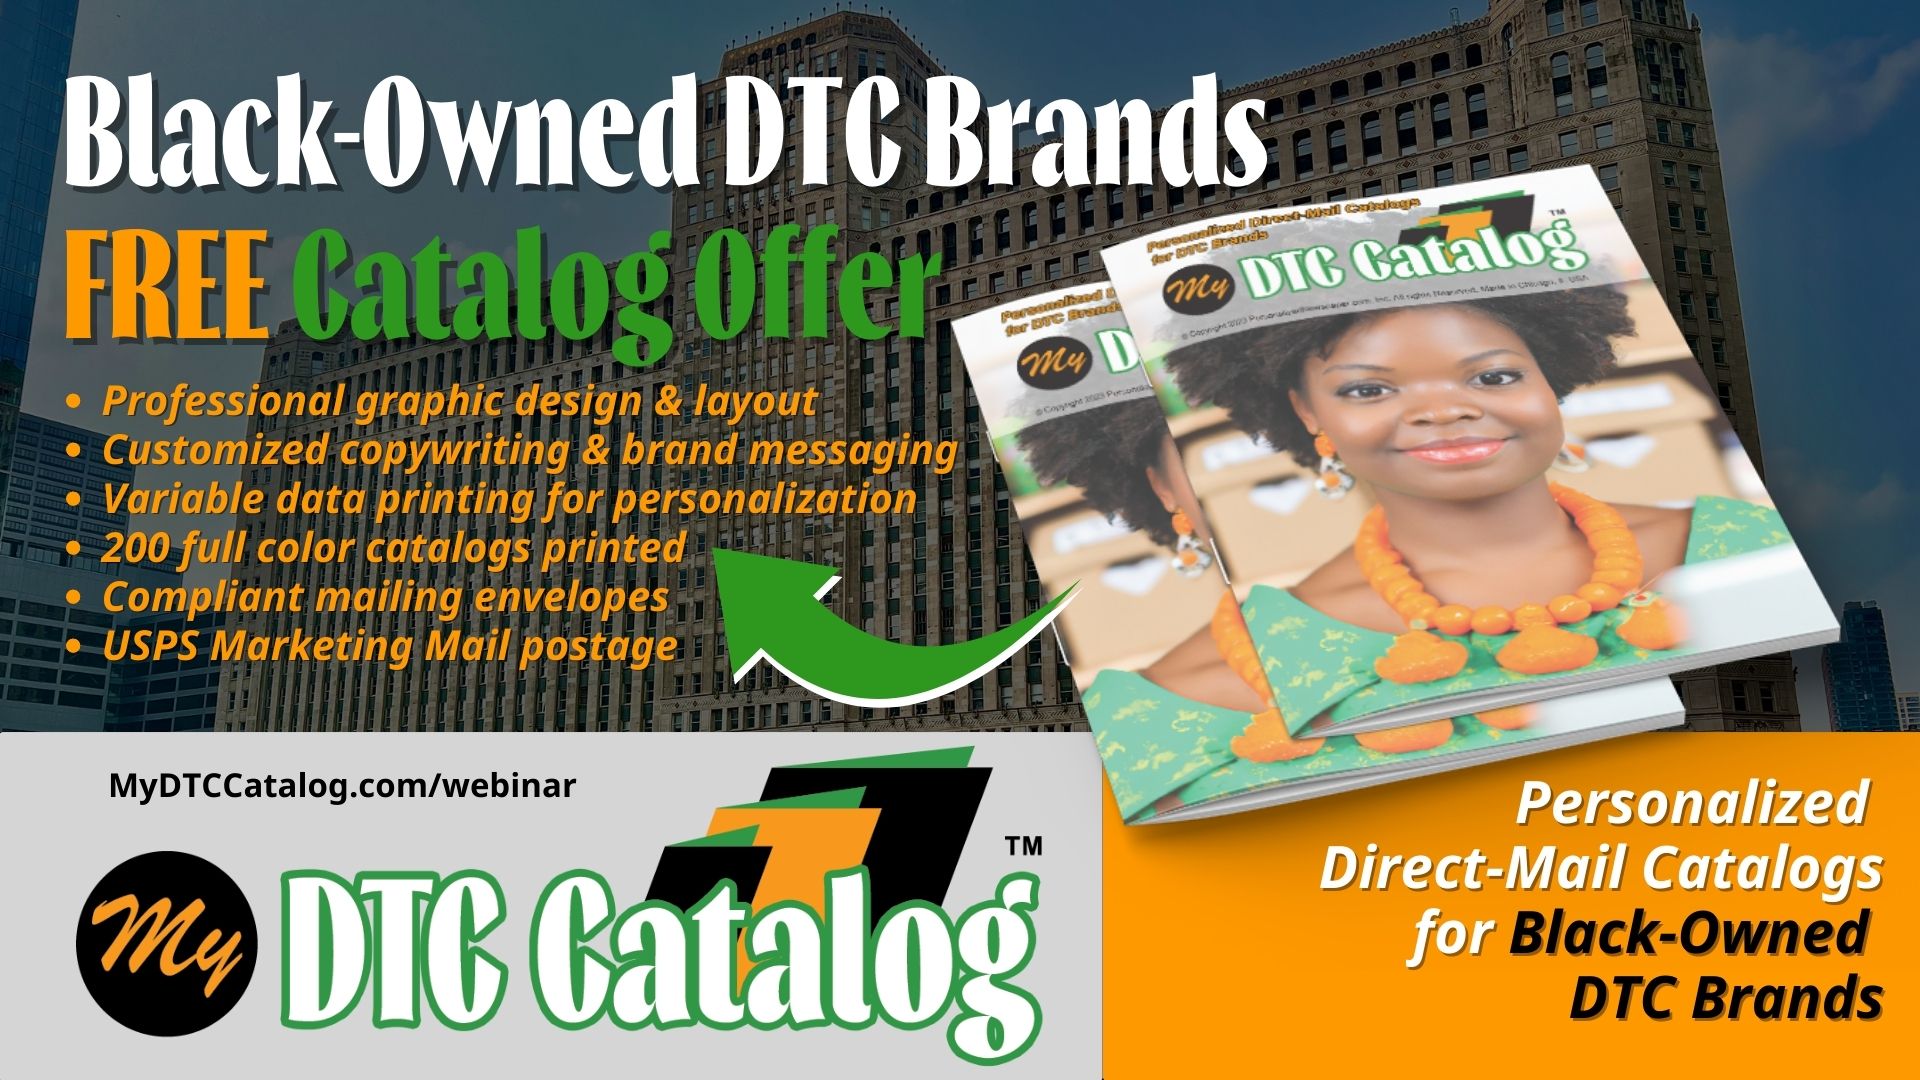 Black-Owned DTC Brands FREE Catalog Offer